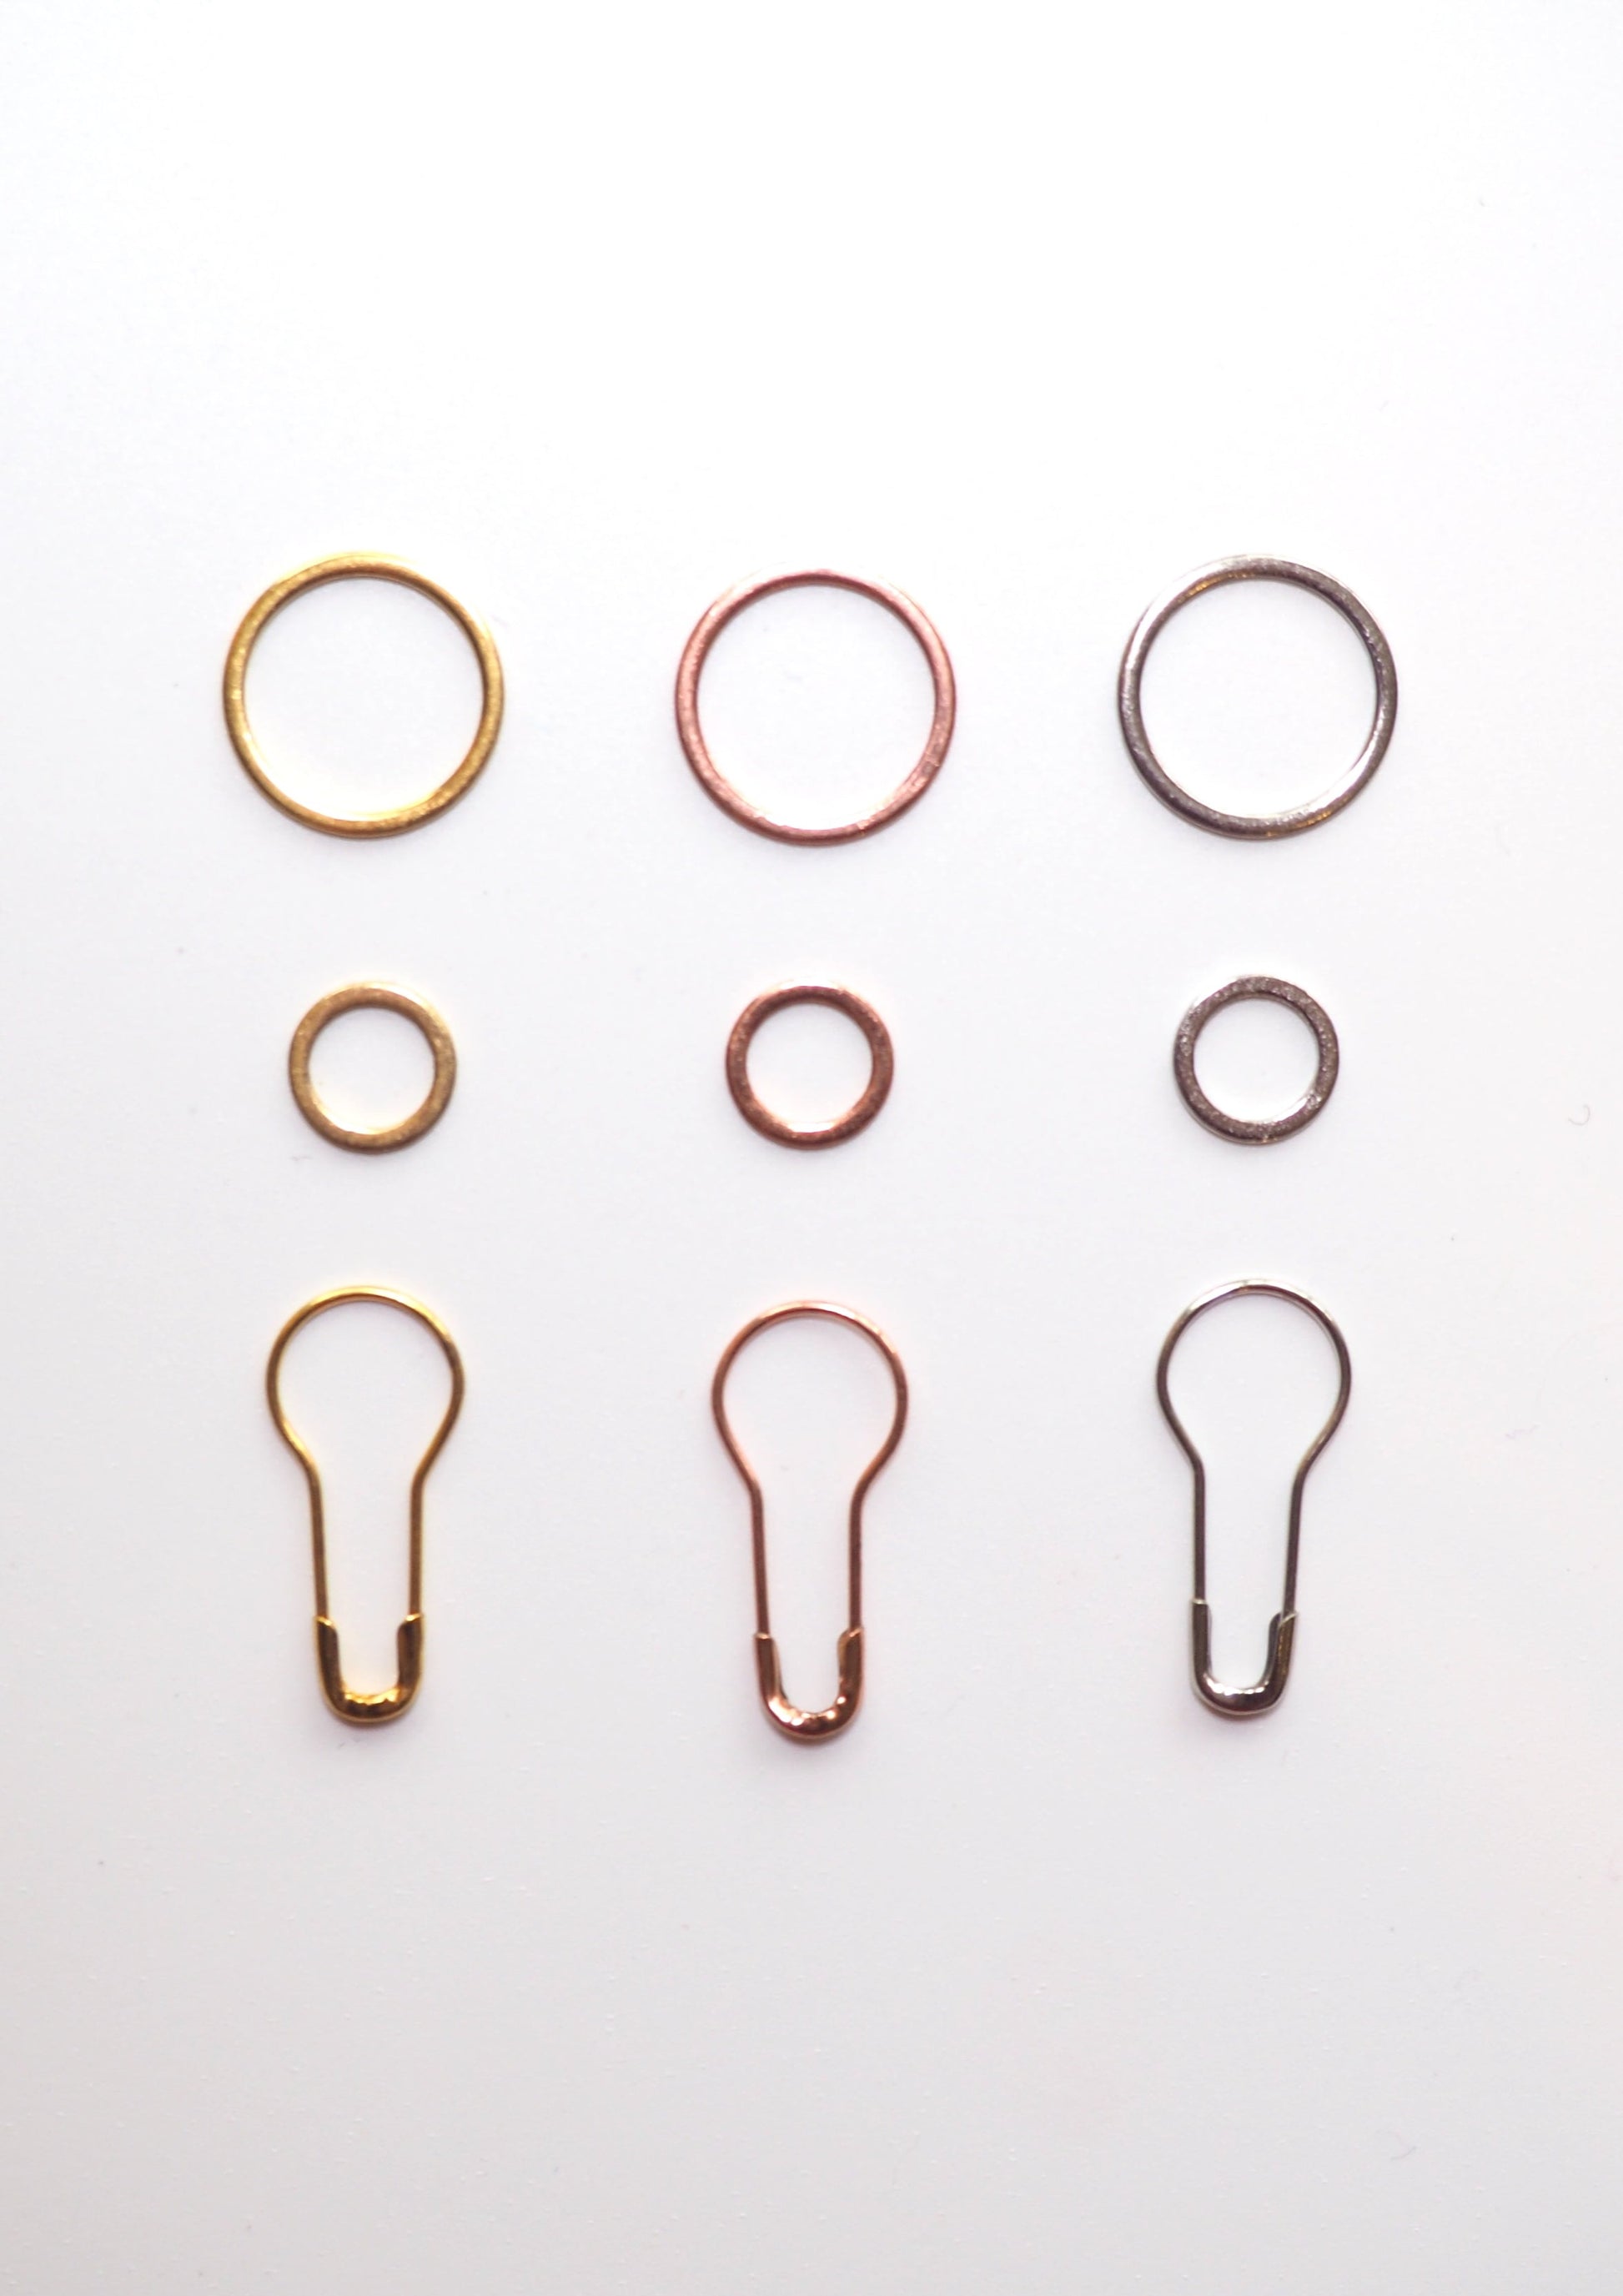 Precious Metal Stitch Markers from CocoKnits